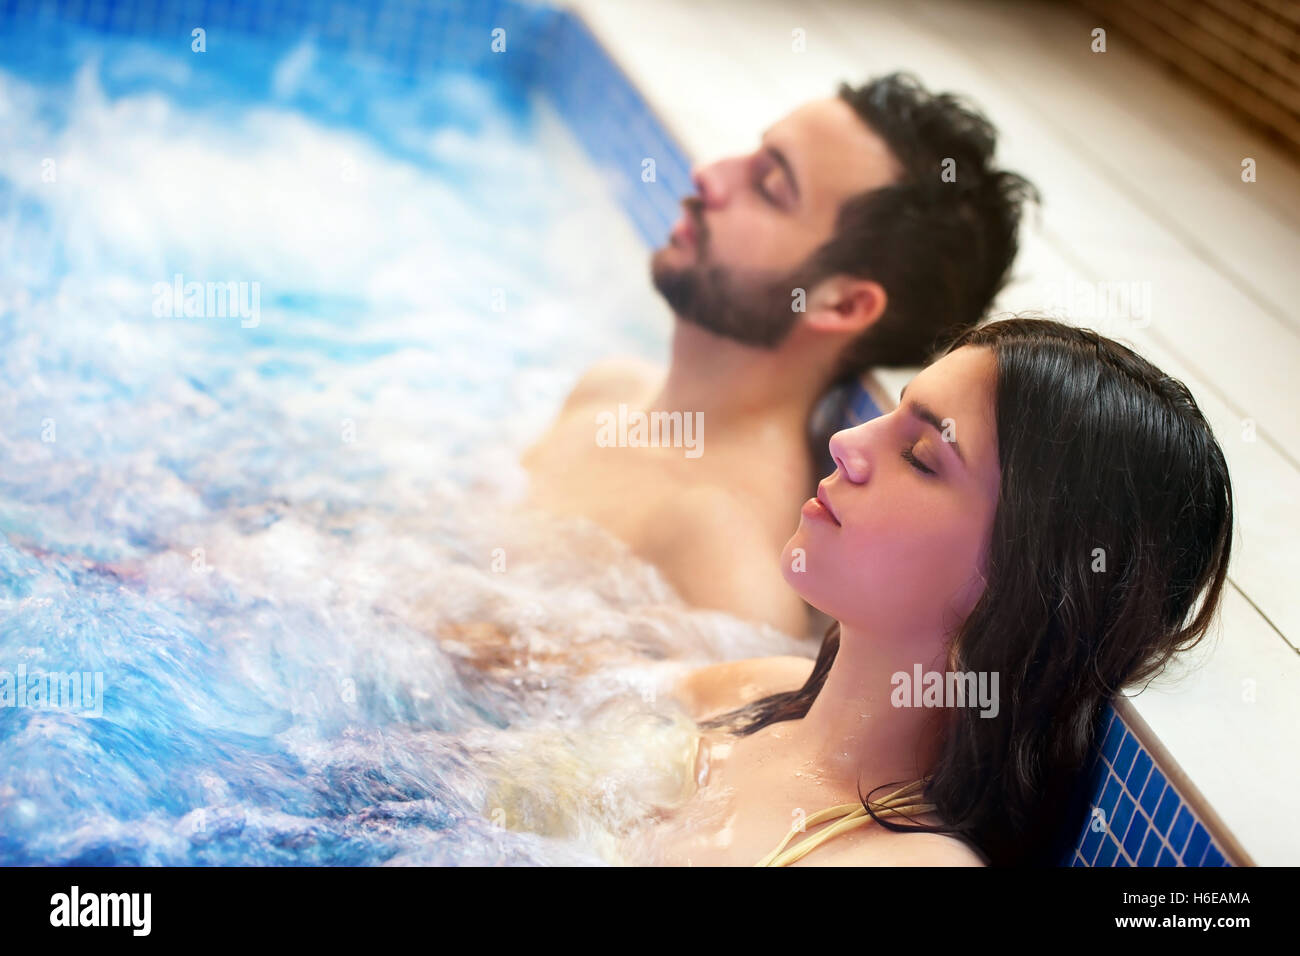 Close up portrait of young couple relaxing in spa jacuzzi. Couple together in bubble water with eyes closed. Stock Photo